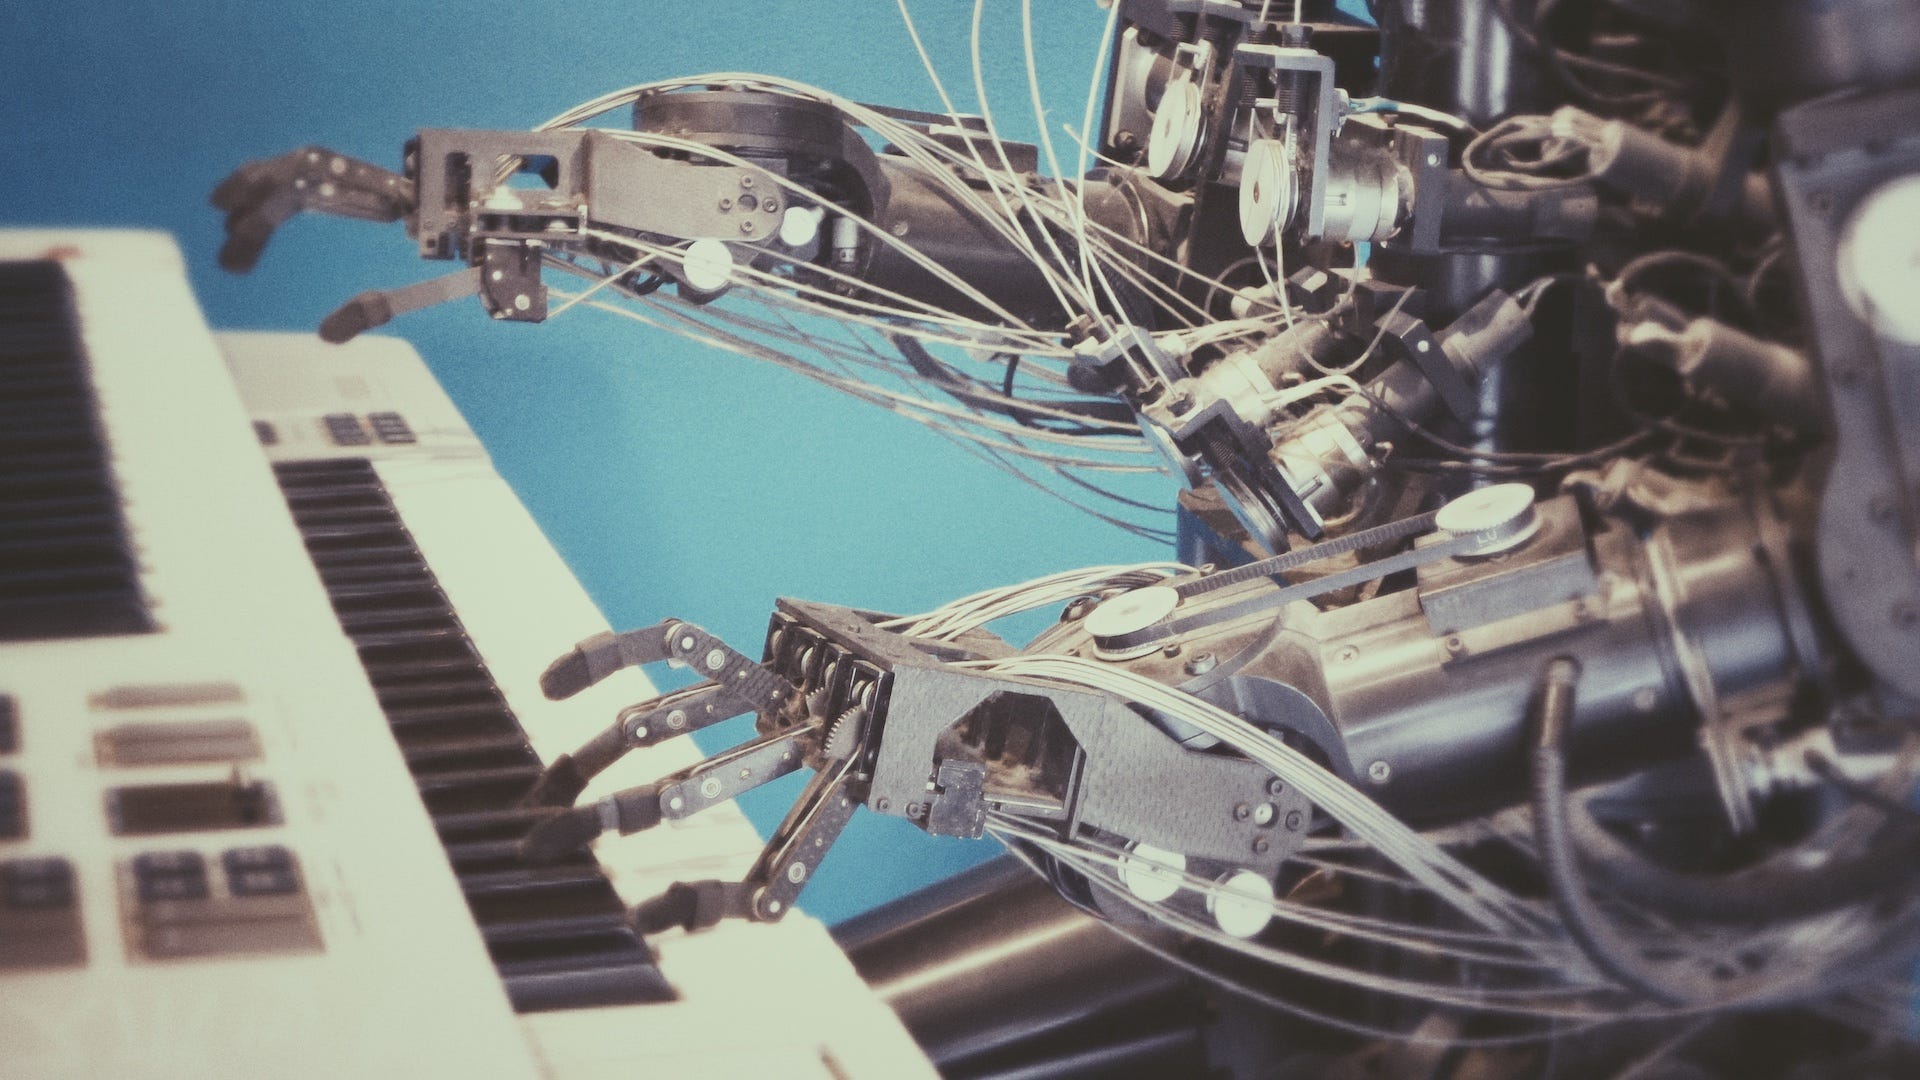 A robot playing the electronic keyboard